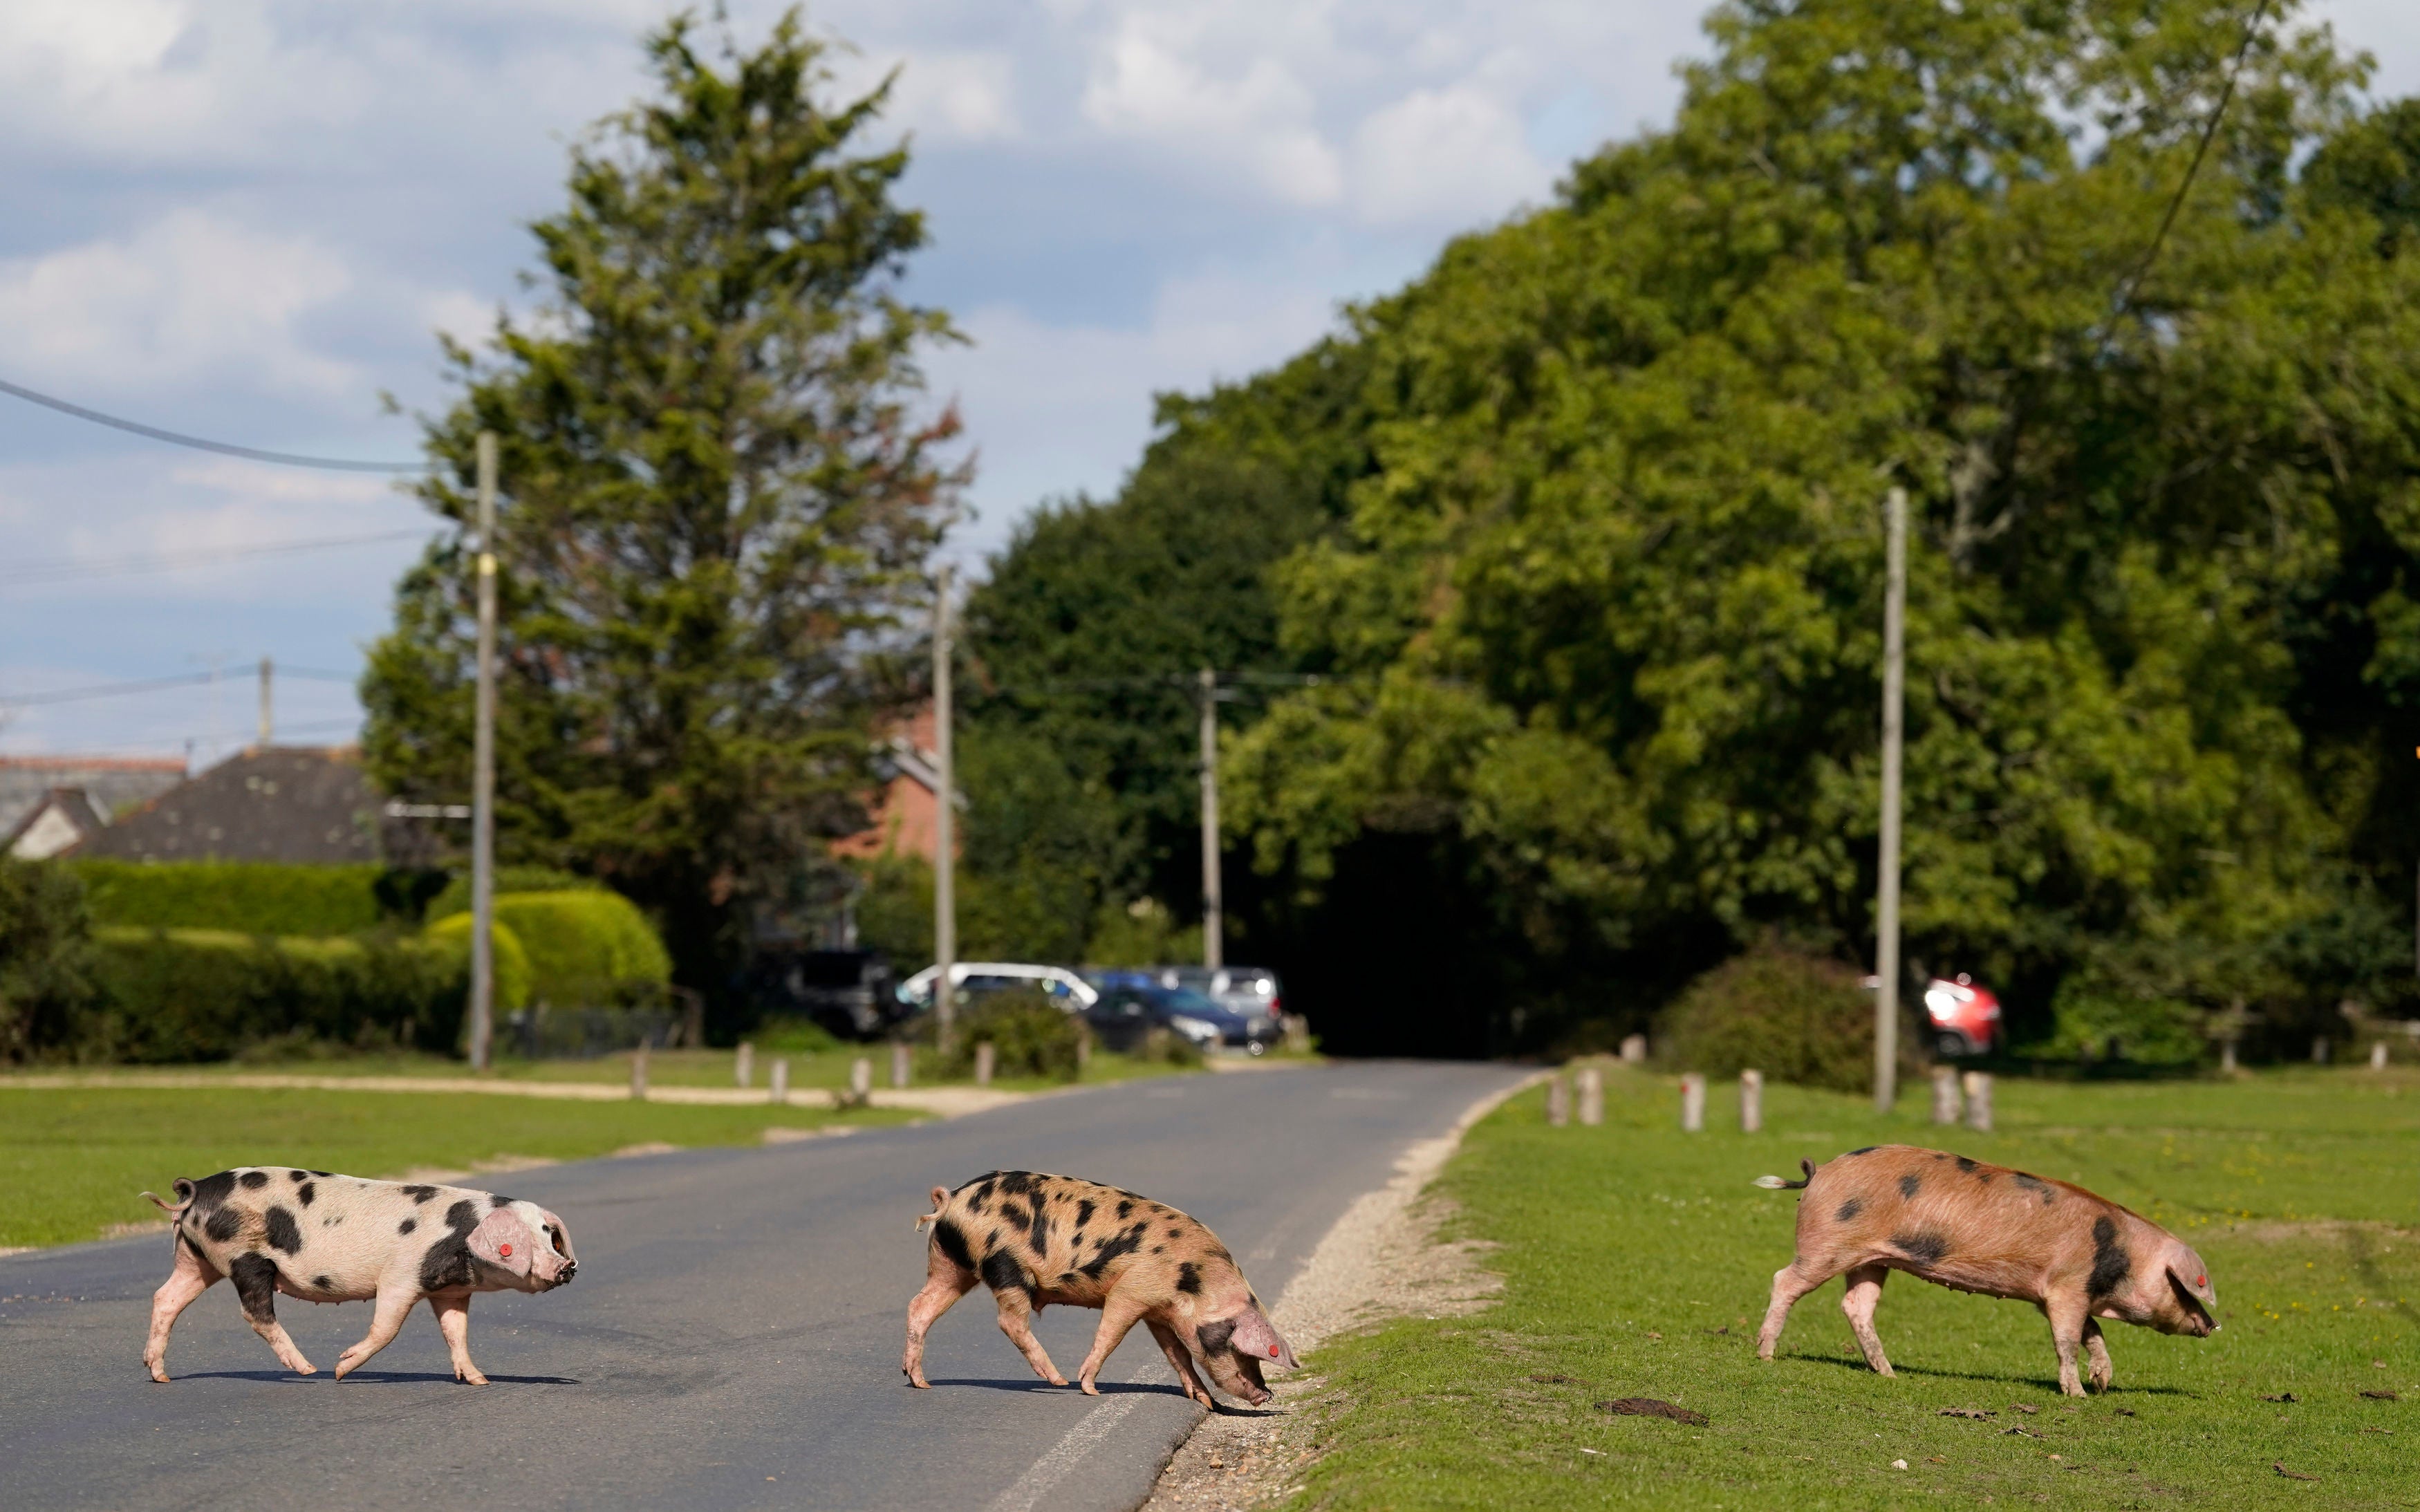 Domestic pigs make their way across a road in Ibsley in Hampshire, during Pannage, or 'Common of mast', where the animals are allowed to wander in the New Forest during a set time in the Autumn to feast on fallen acorns, which in large quantities are dangerous for ponies and cattle